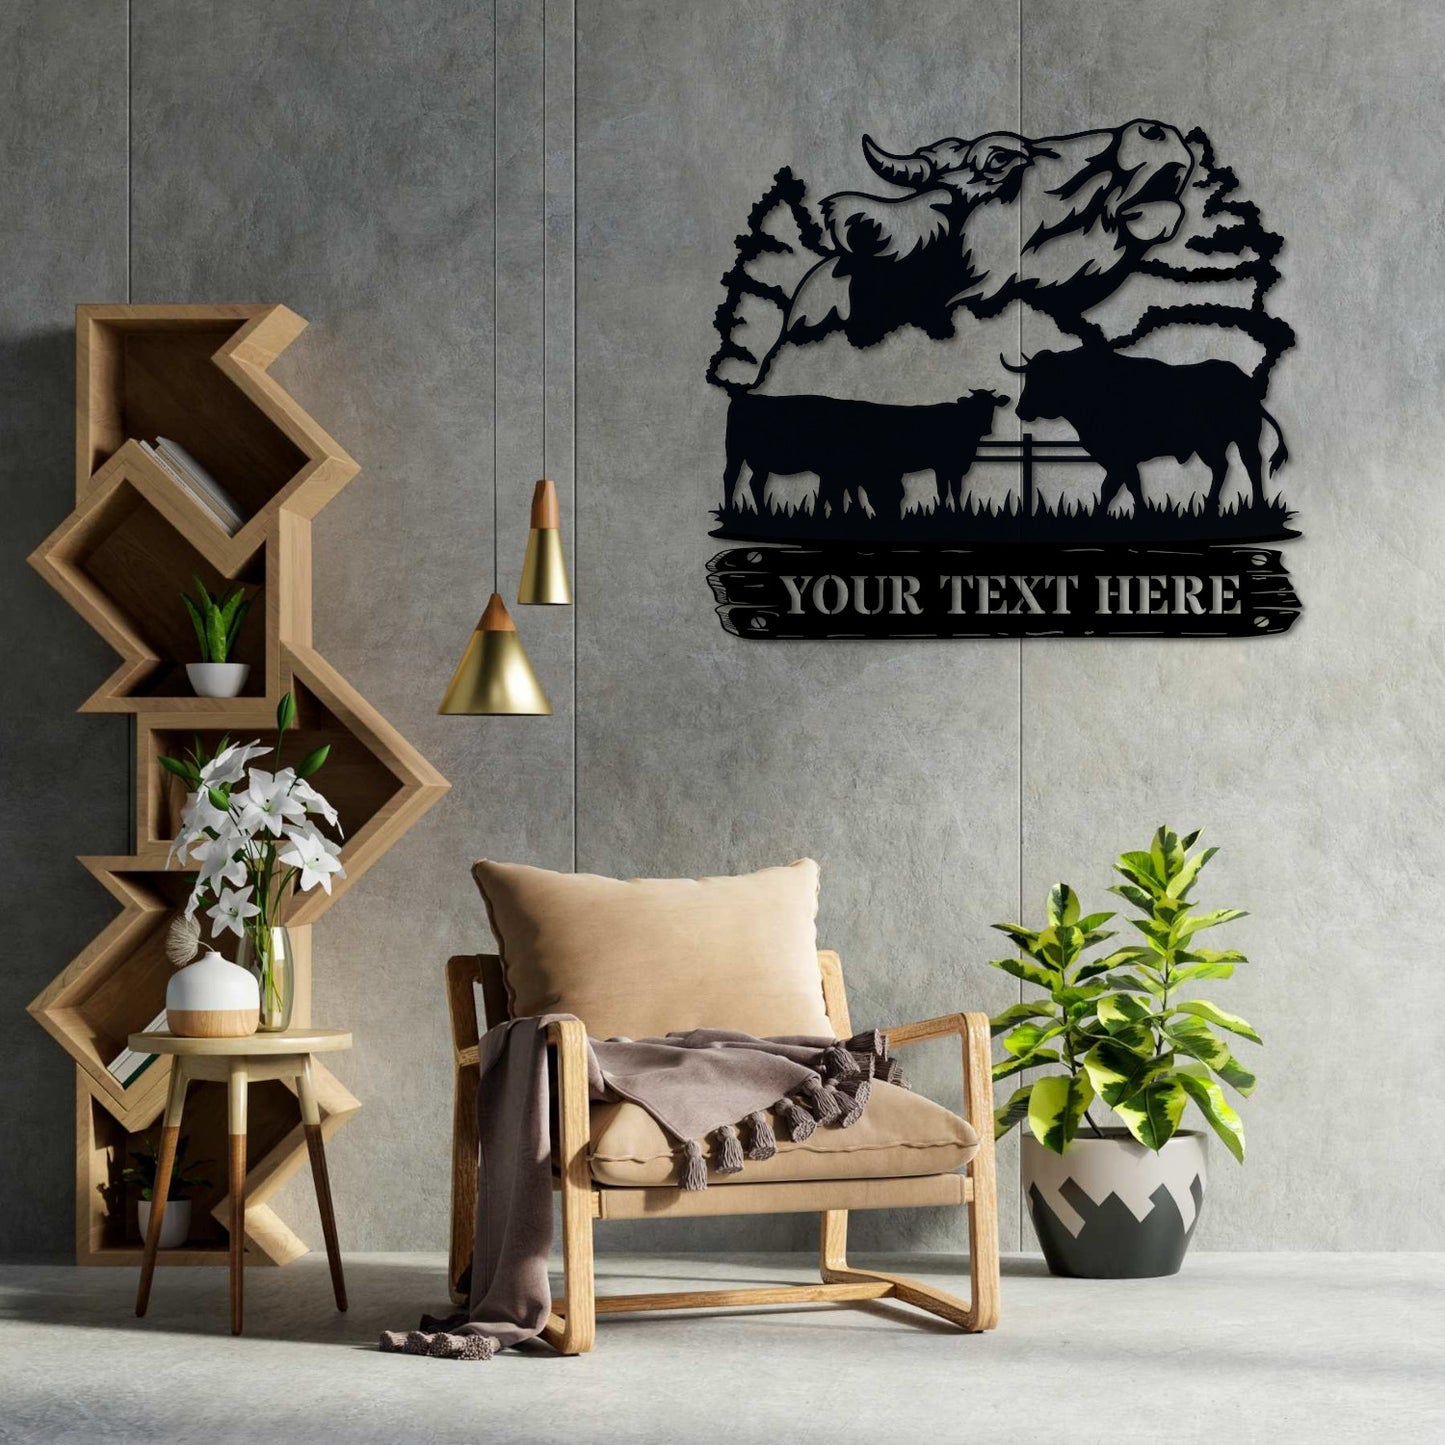 Personalized Wildlife Bull Ranch Name Metal Sign. Custom Bull Wall Decor Gift. Customized Nature Wall Art Gift. Bull Ranch Wall Decor Gift